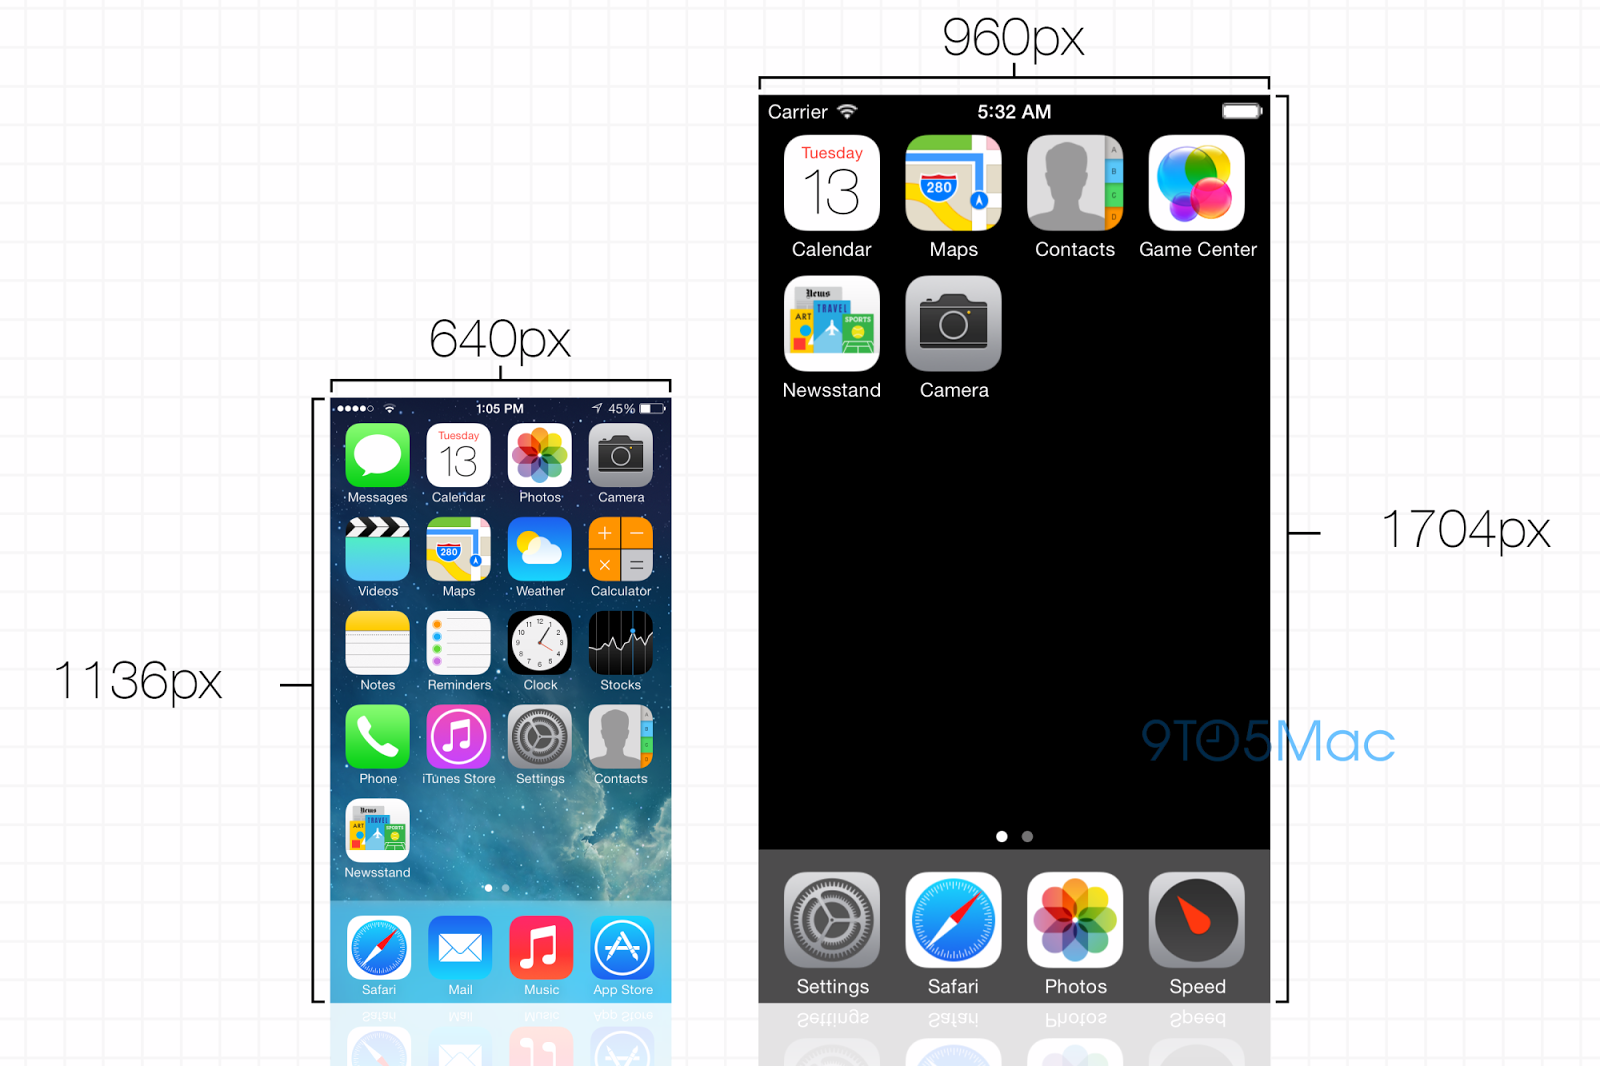 1704*960 â€“ the resolution pegged for upcoming iPhone 6